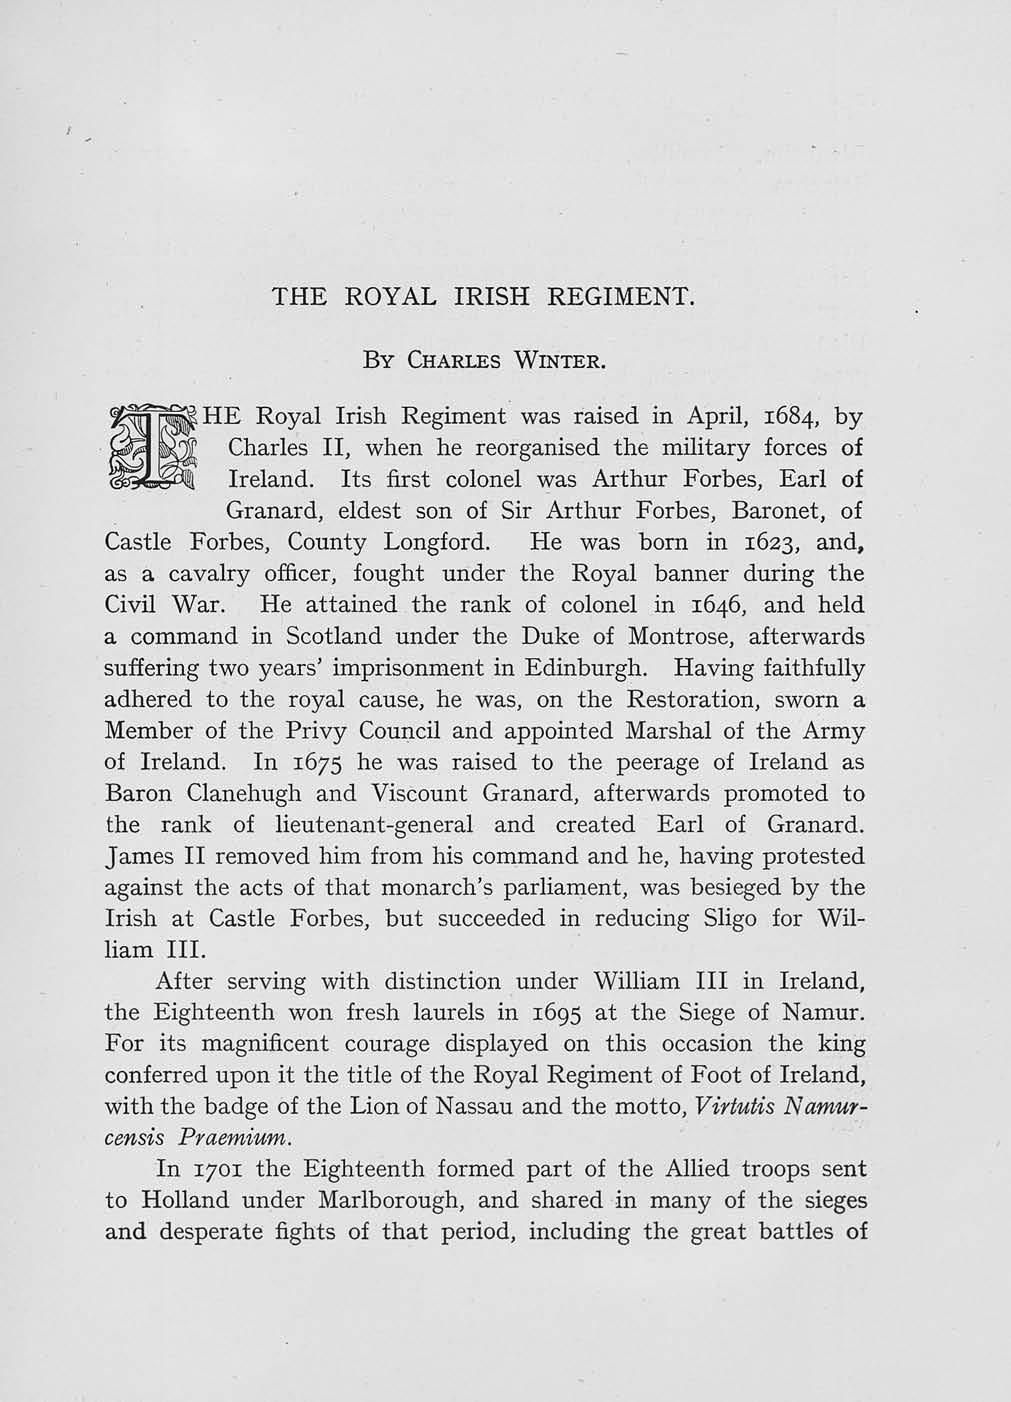 THE ROYAL IRISH REGIMENT. BY CHARLES WINTER. HE Royal Irish Regiment was raised in April, 1684, by Charles II, when he reorganised the military forces of Ireland.